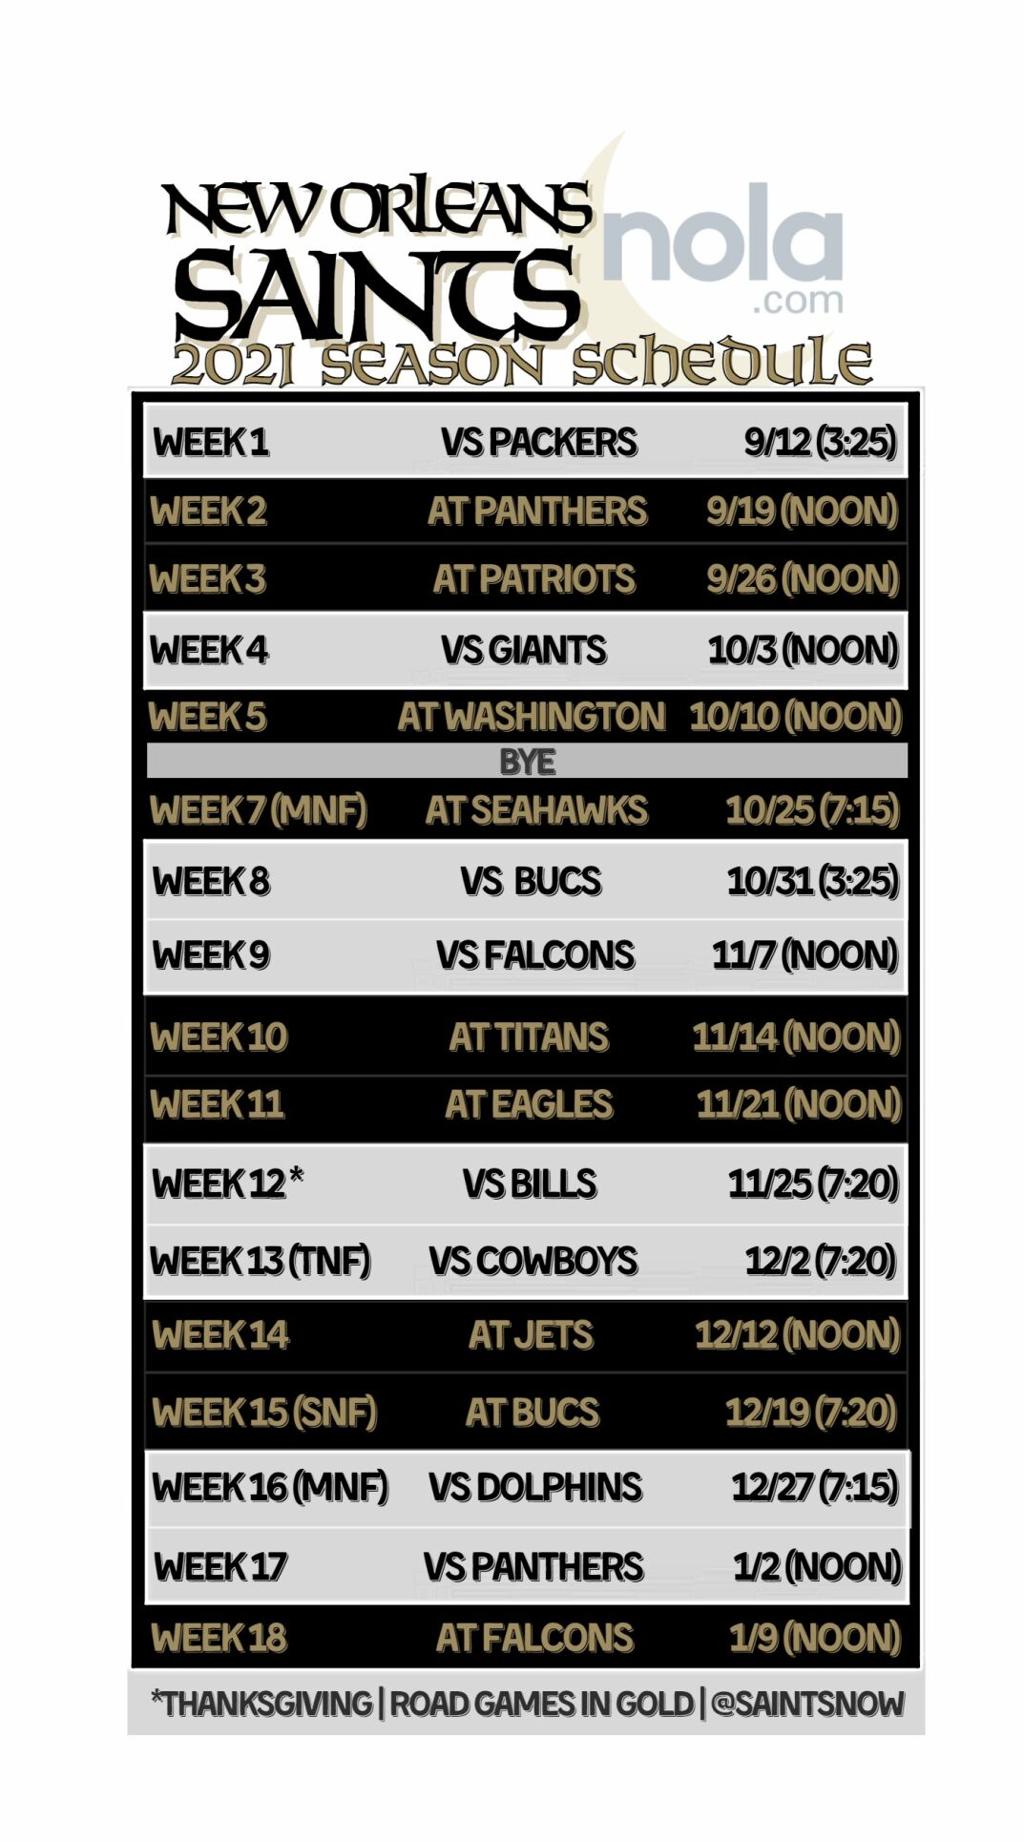 Want Saints 2021 Schedule As Your Phone Wallpaper Click Here For Image How To Info Saints Nola Com